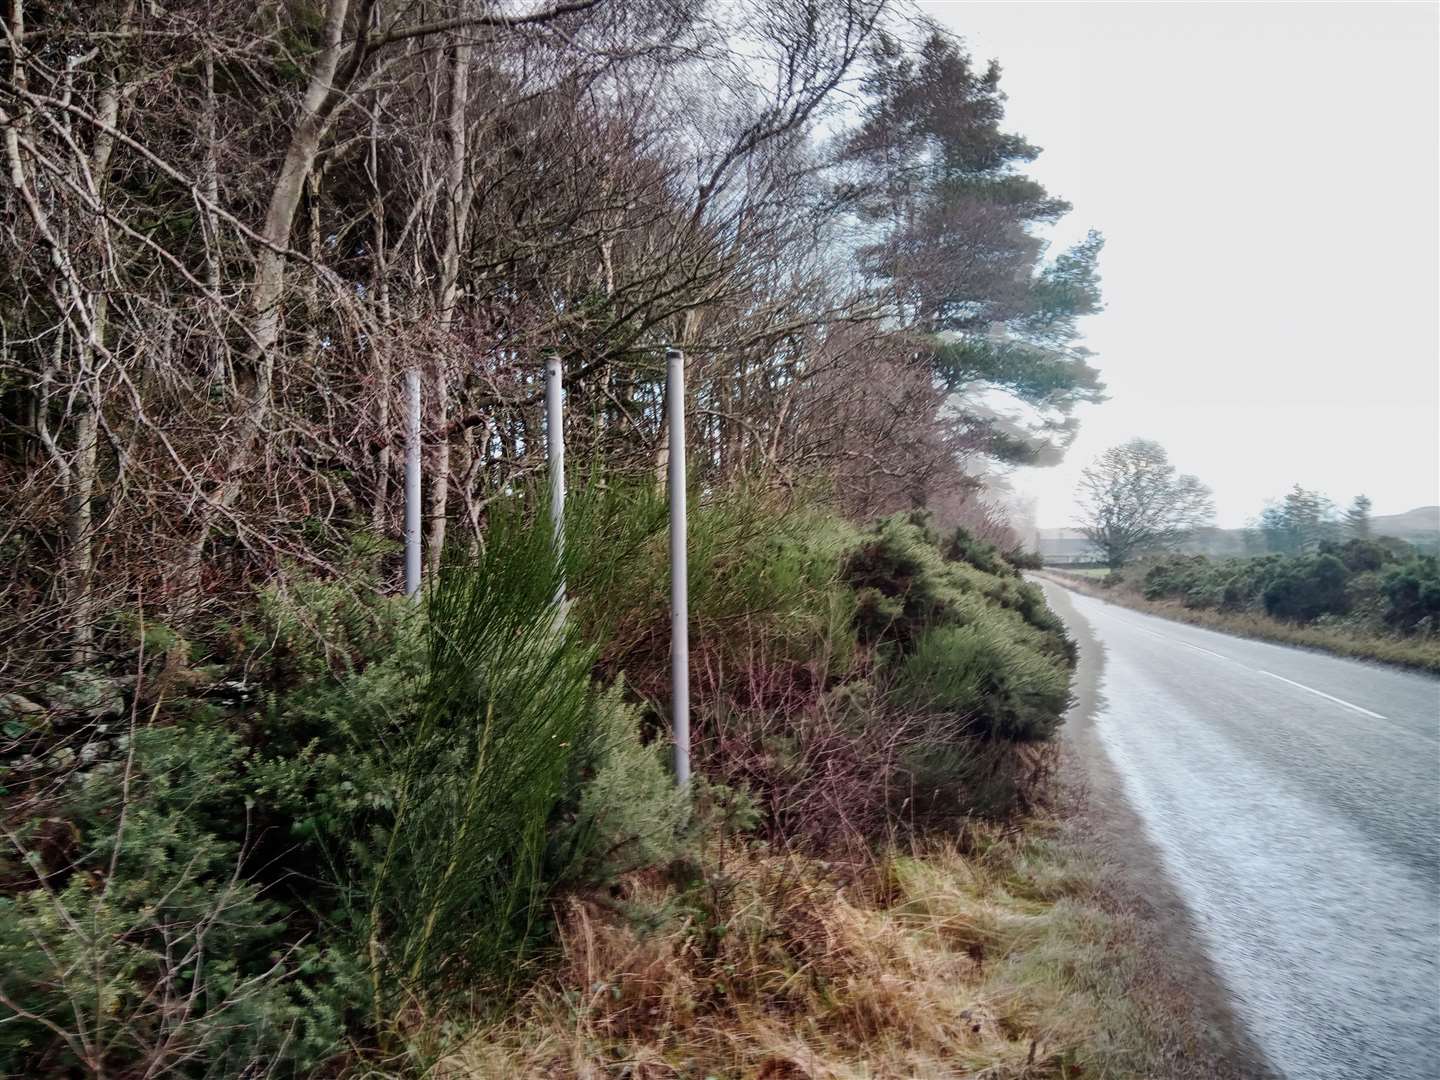 Metal posts remain in place on the western side of Reay, but the sign they once supported has been removed.